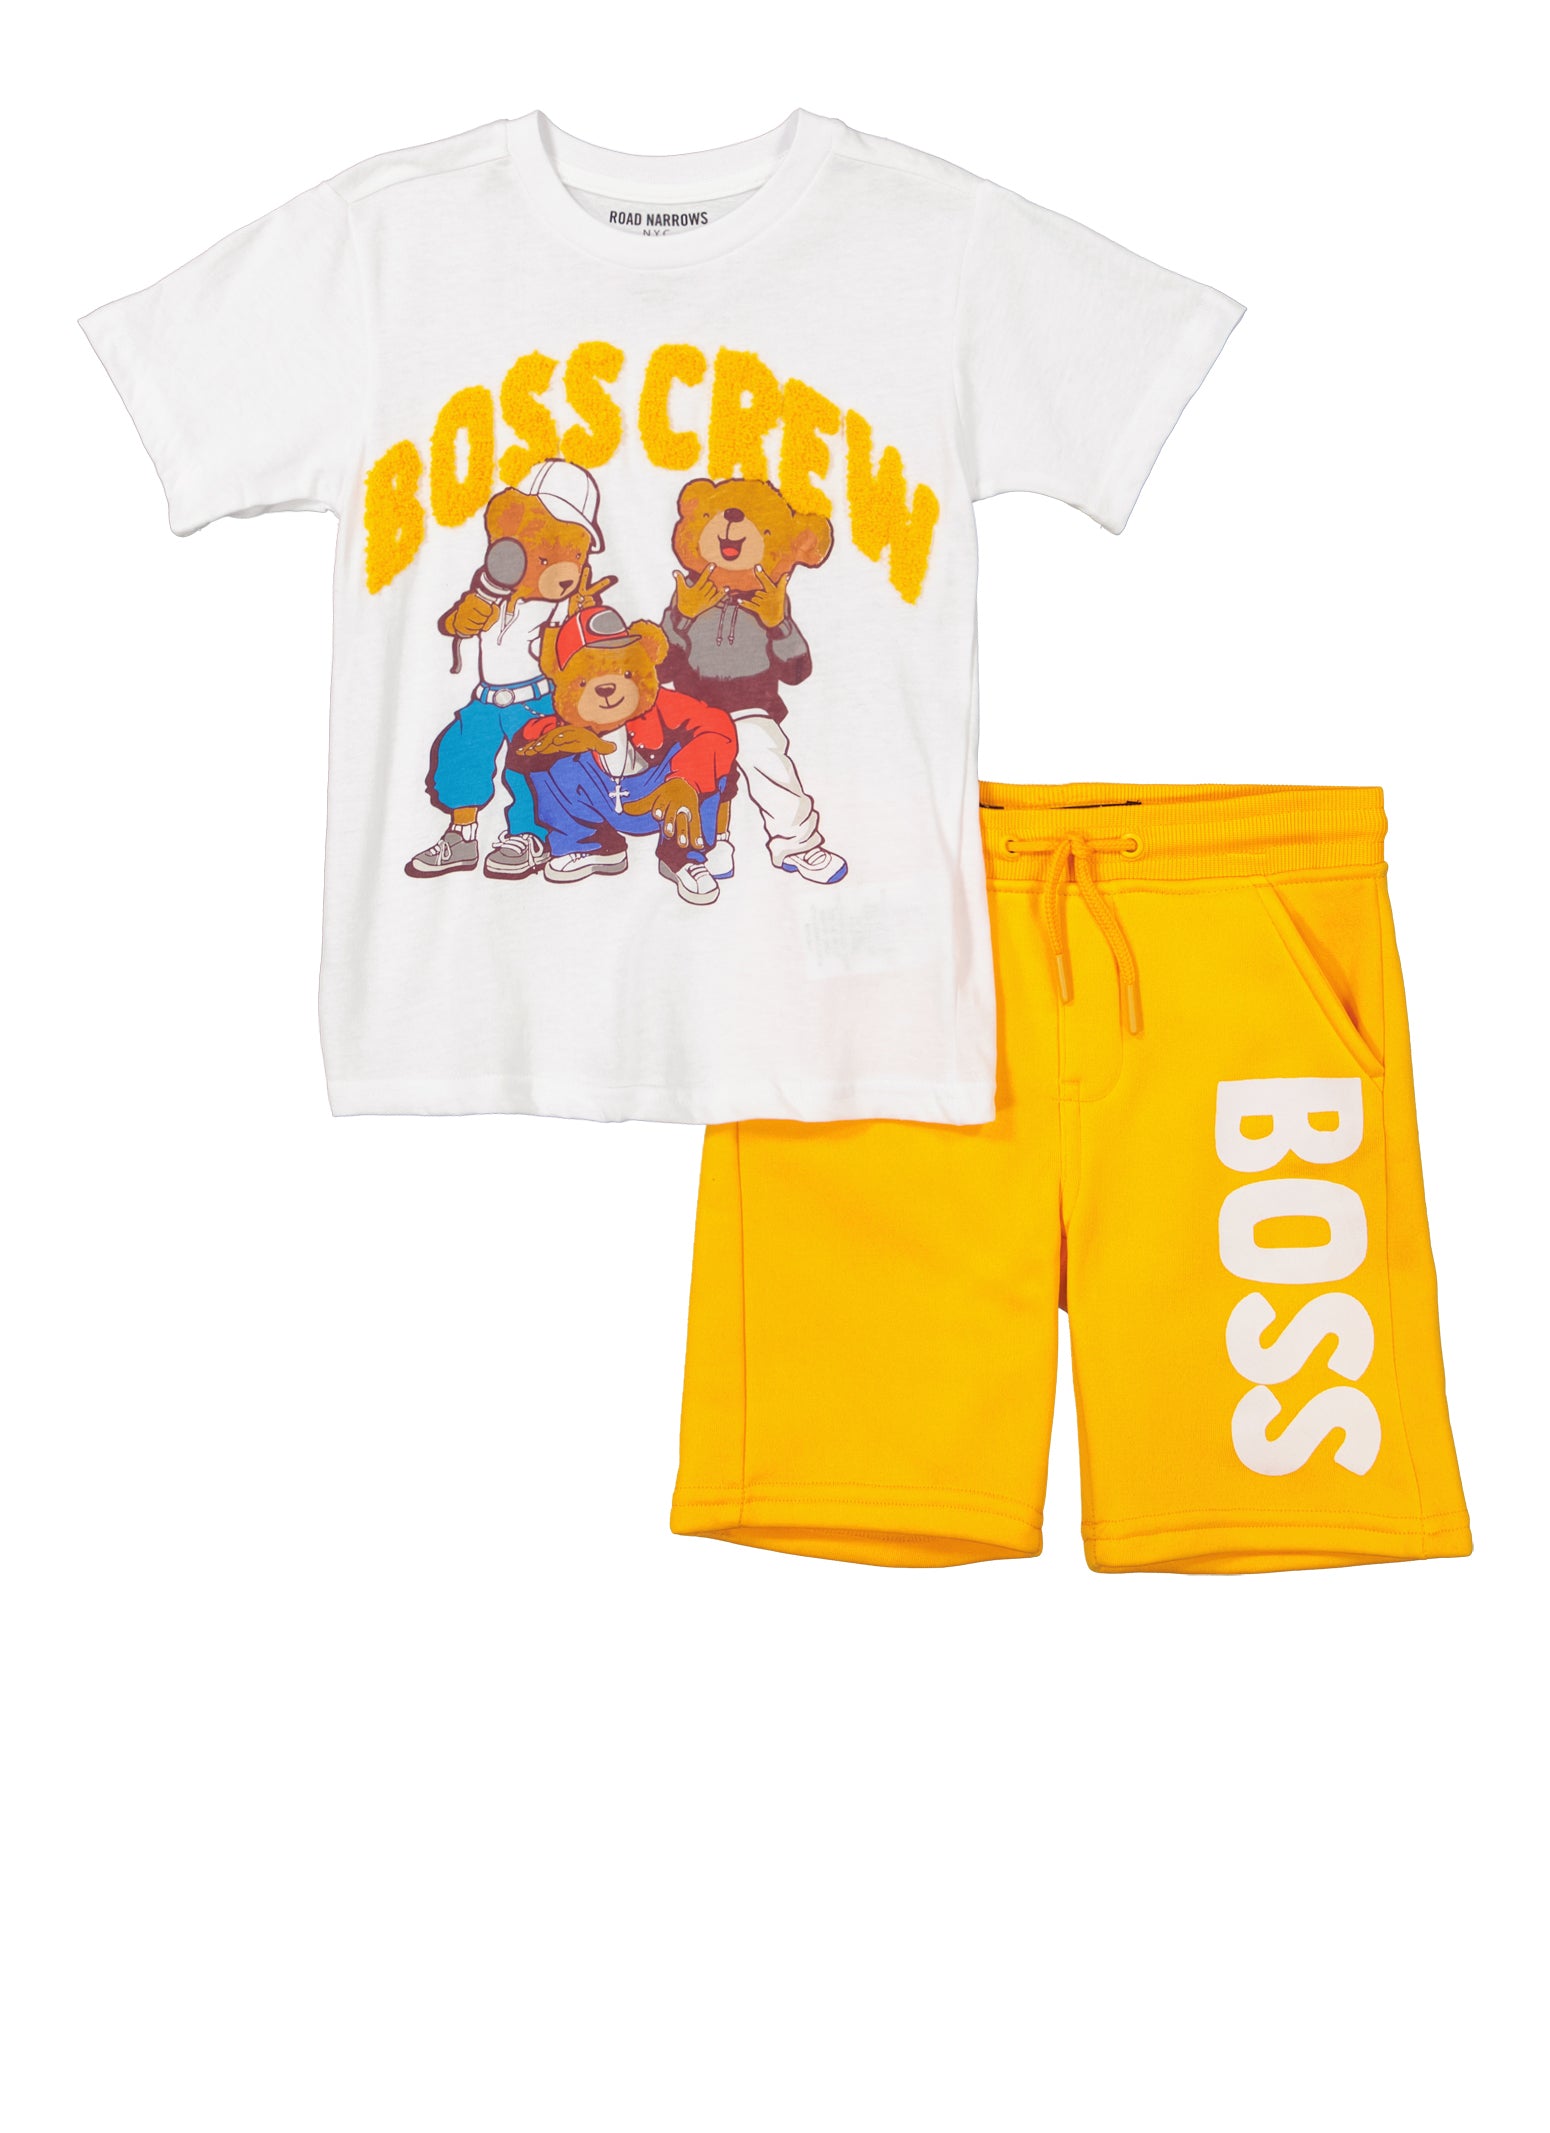 Little Boys Boss Crew Chenille Patch Graphic Tee and Shorts, Yellow, Size 6